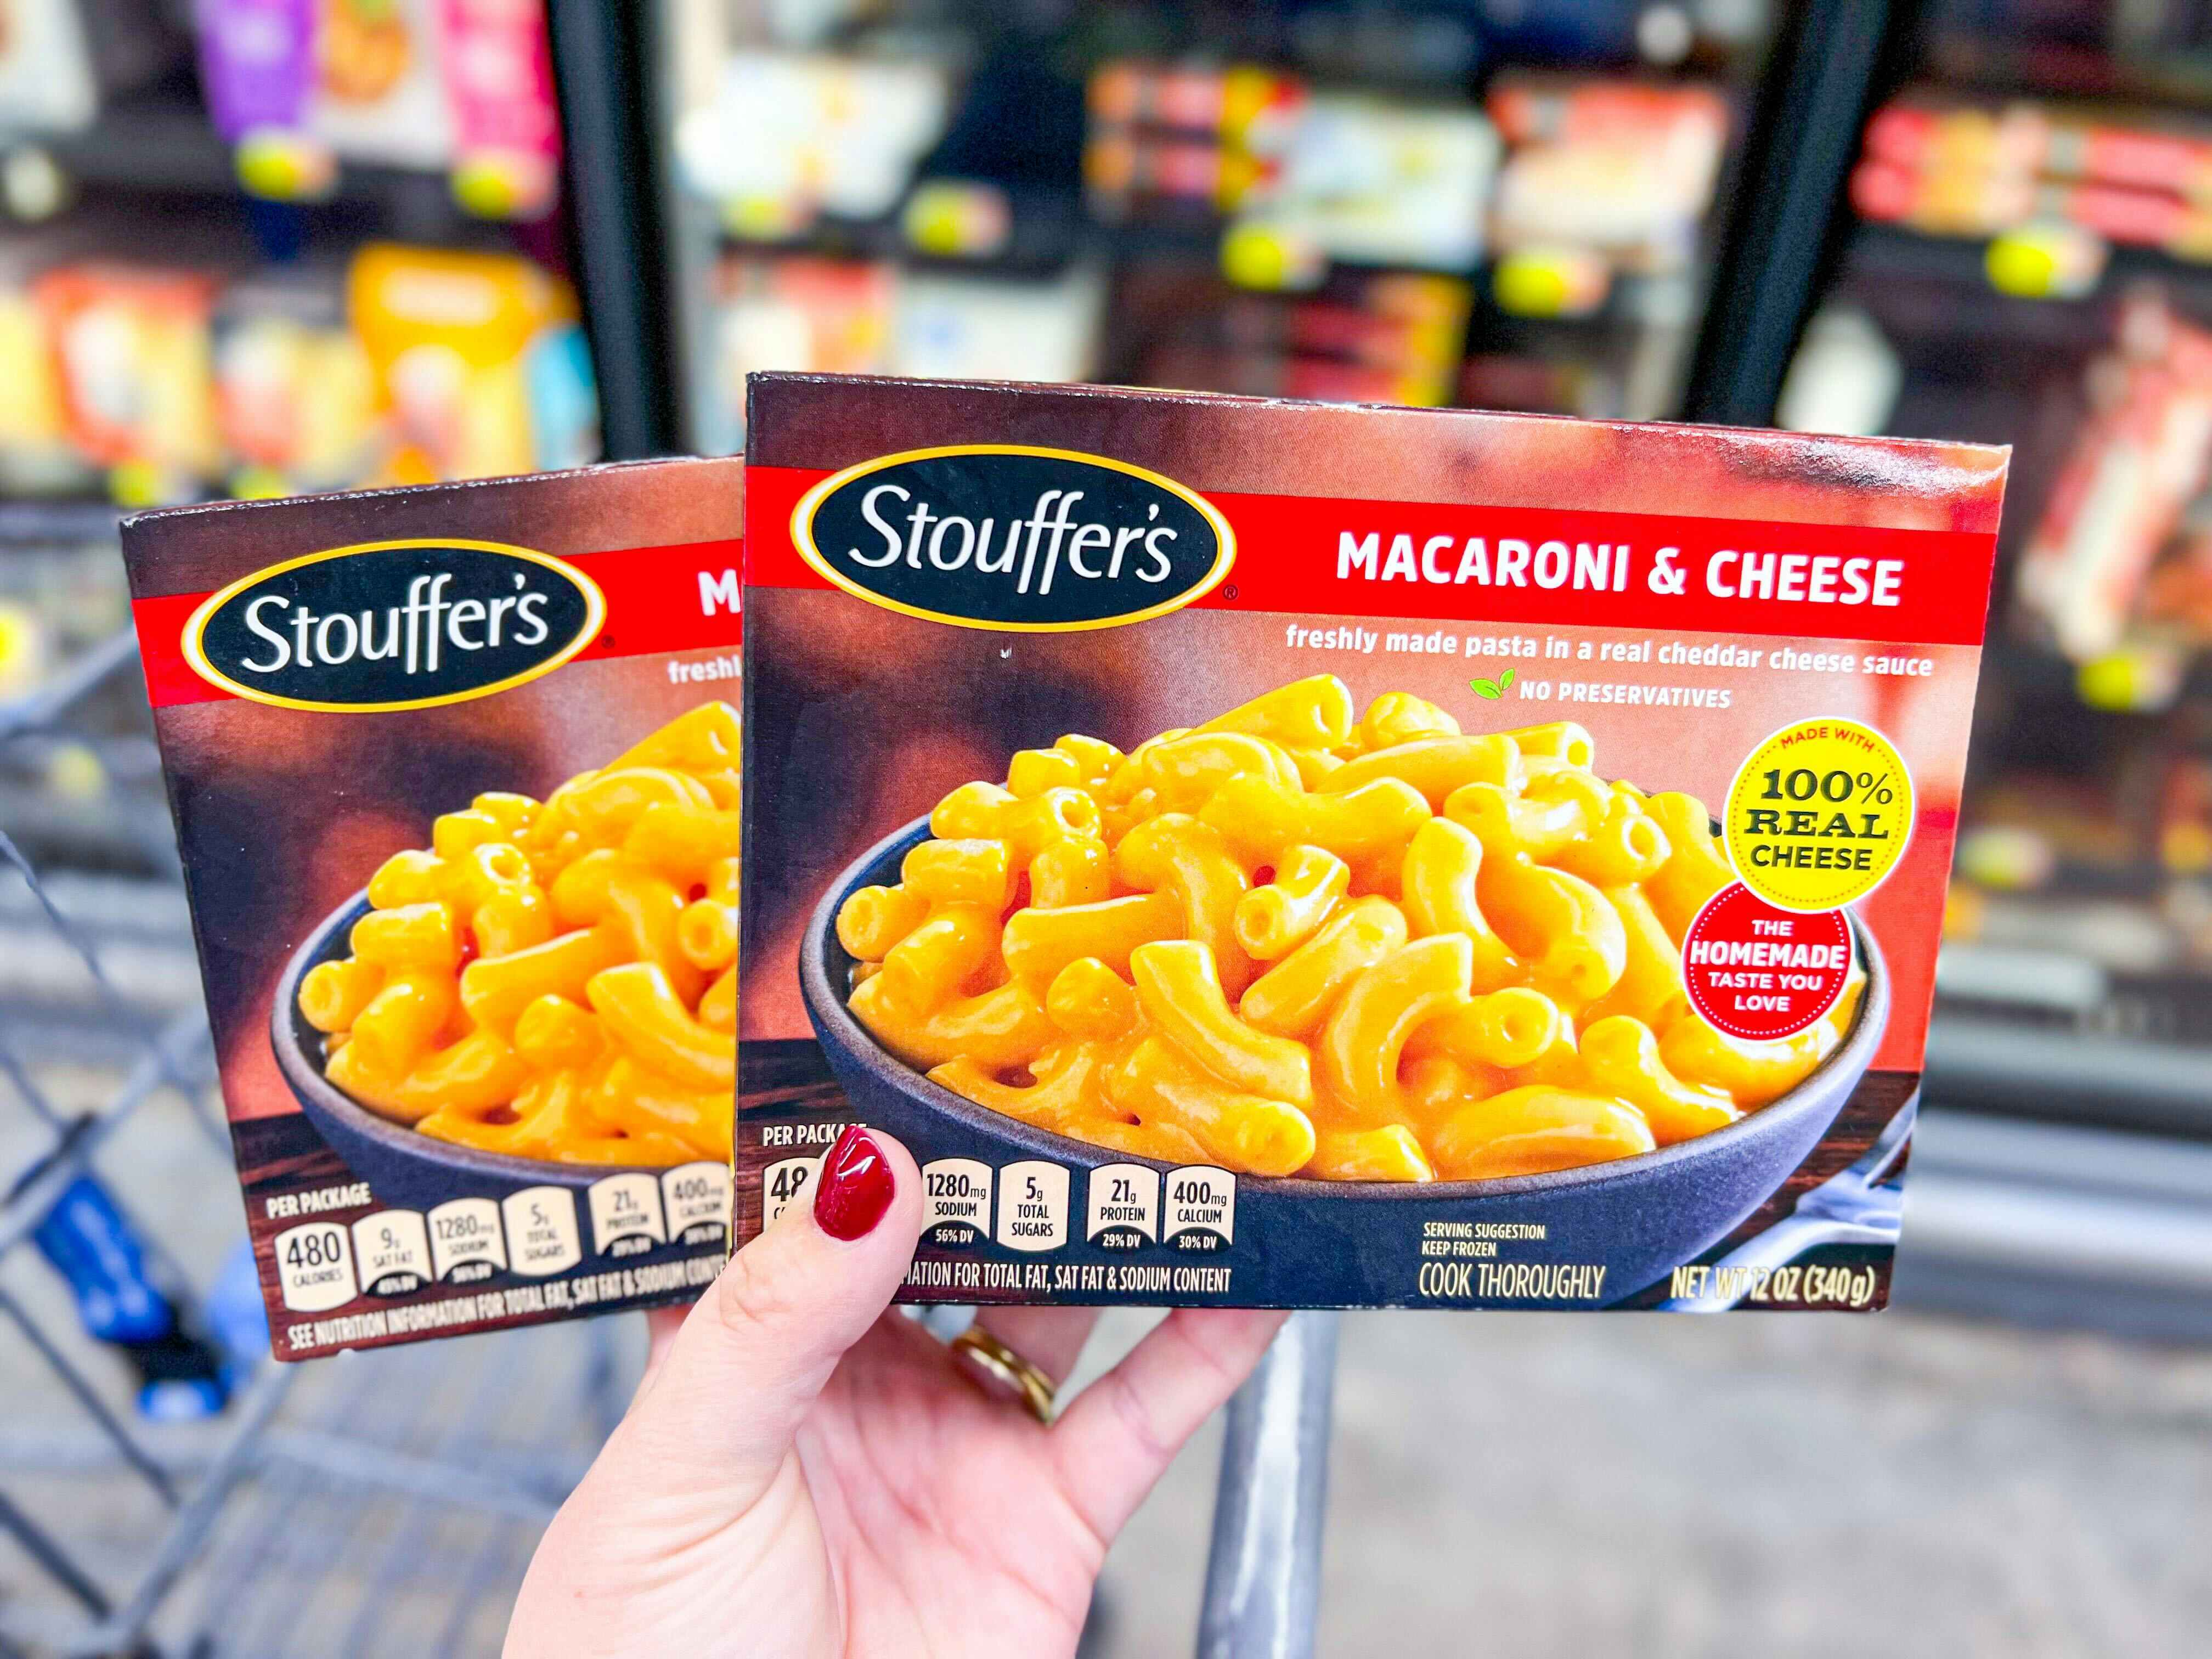 Hand holding two boxes of Stouffer's Mac & Cheese